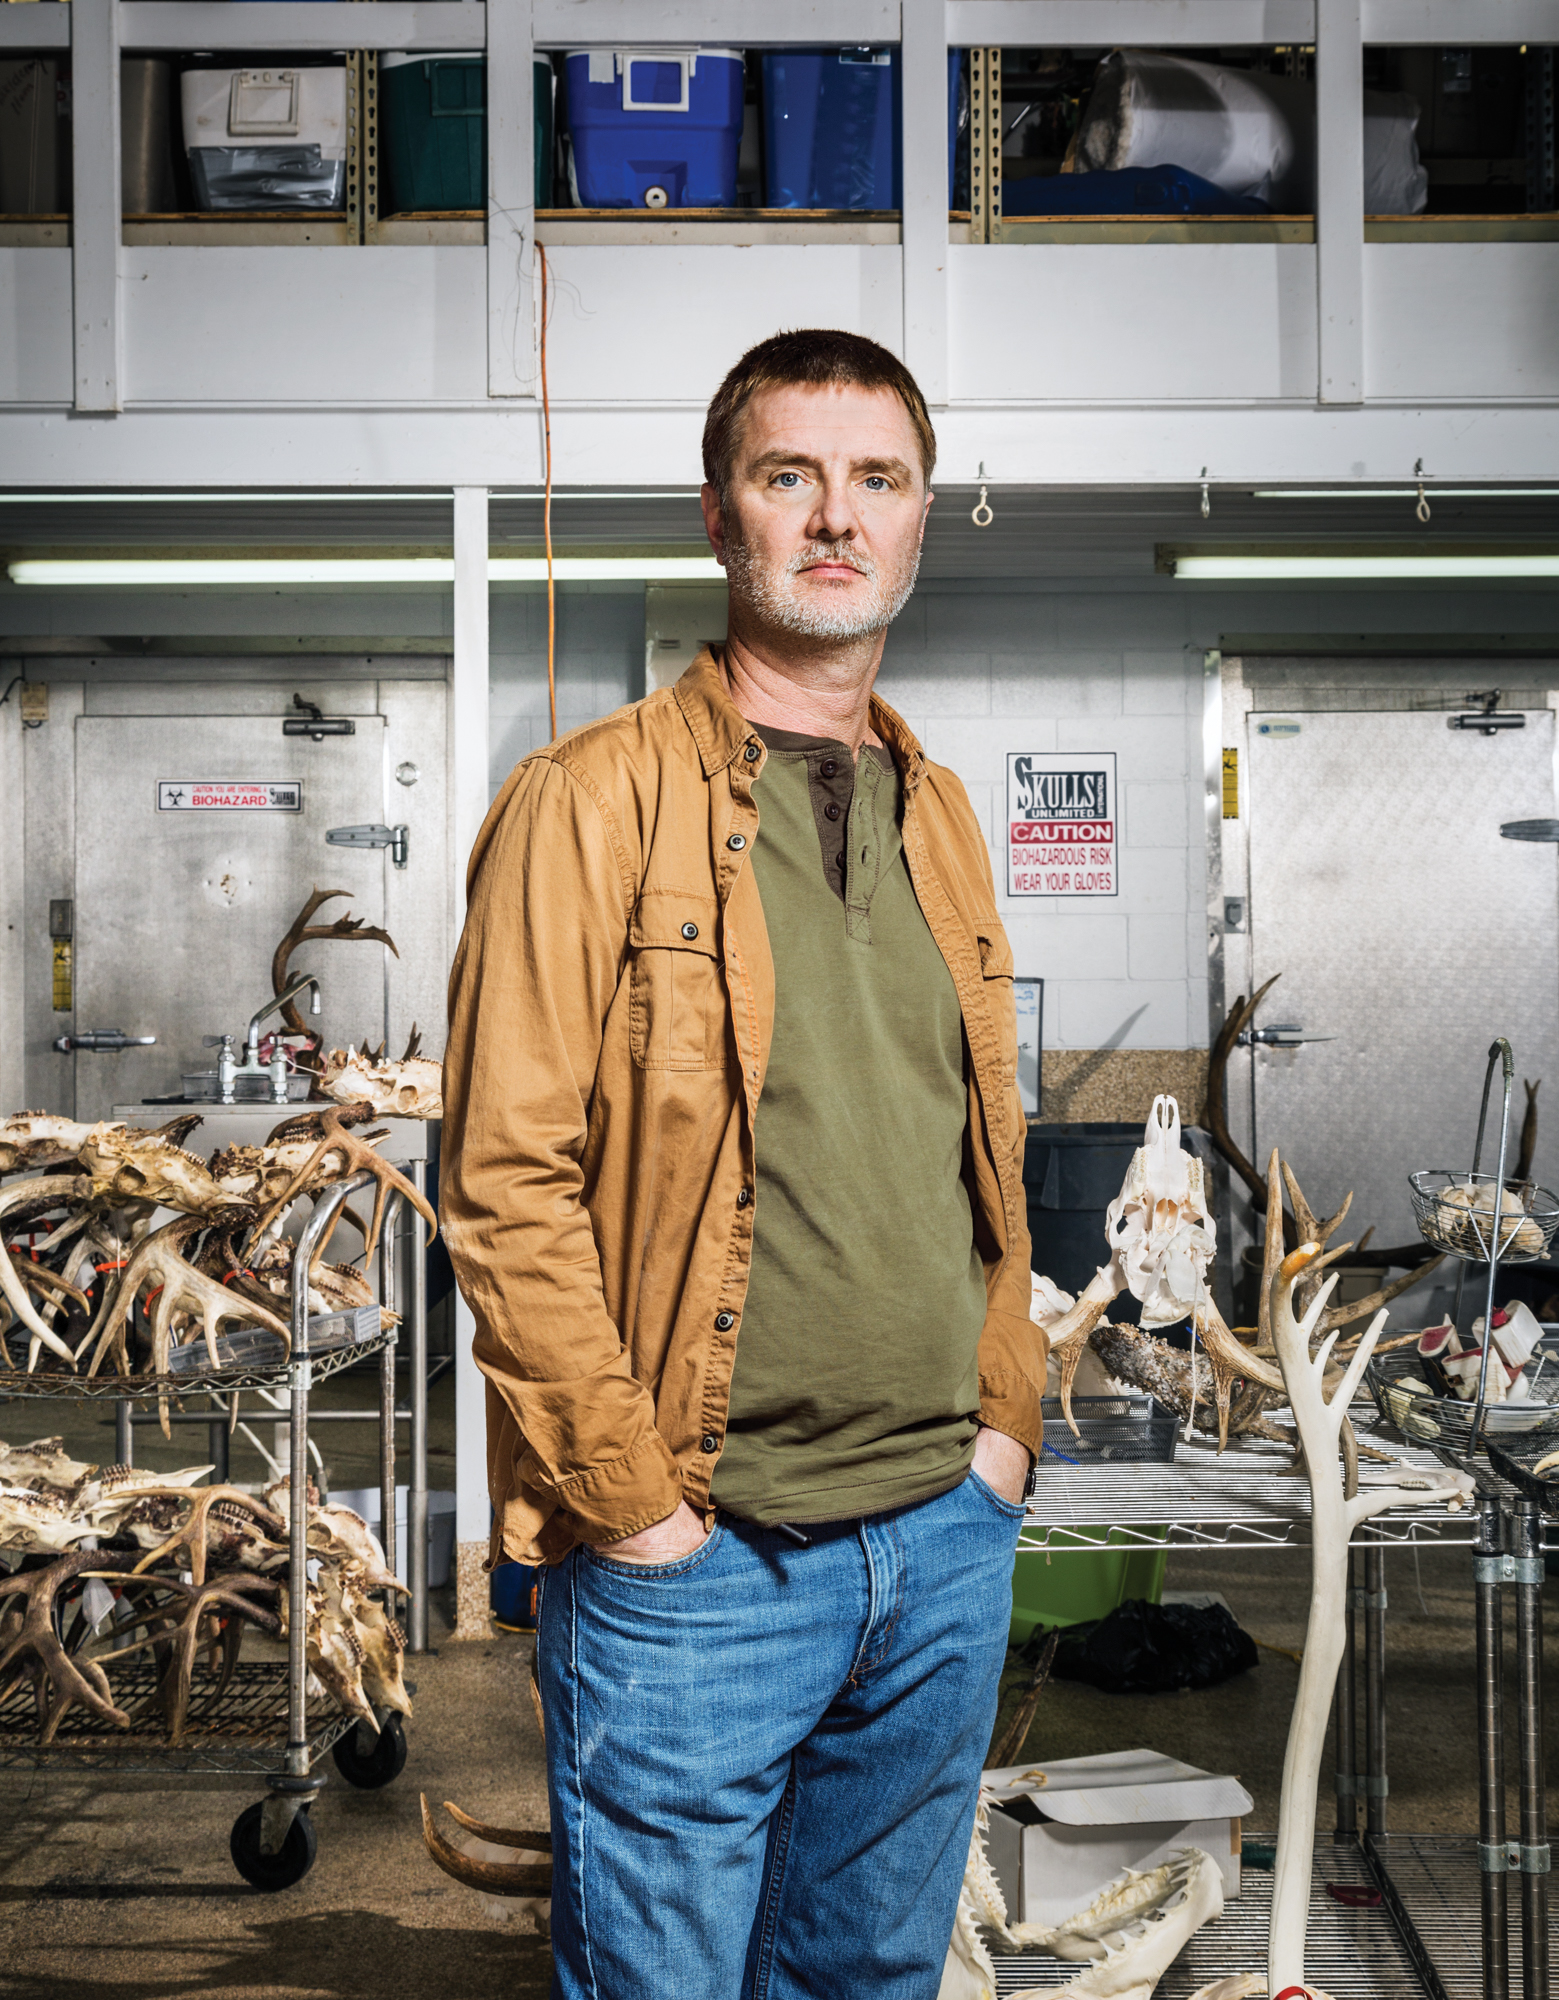 A man stands with his hands in his pockets in front of work tables at a taxidermy shop.